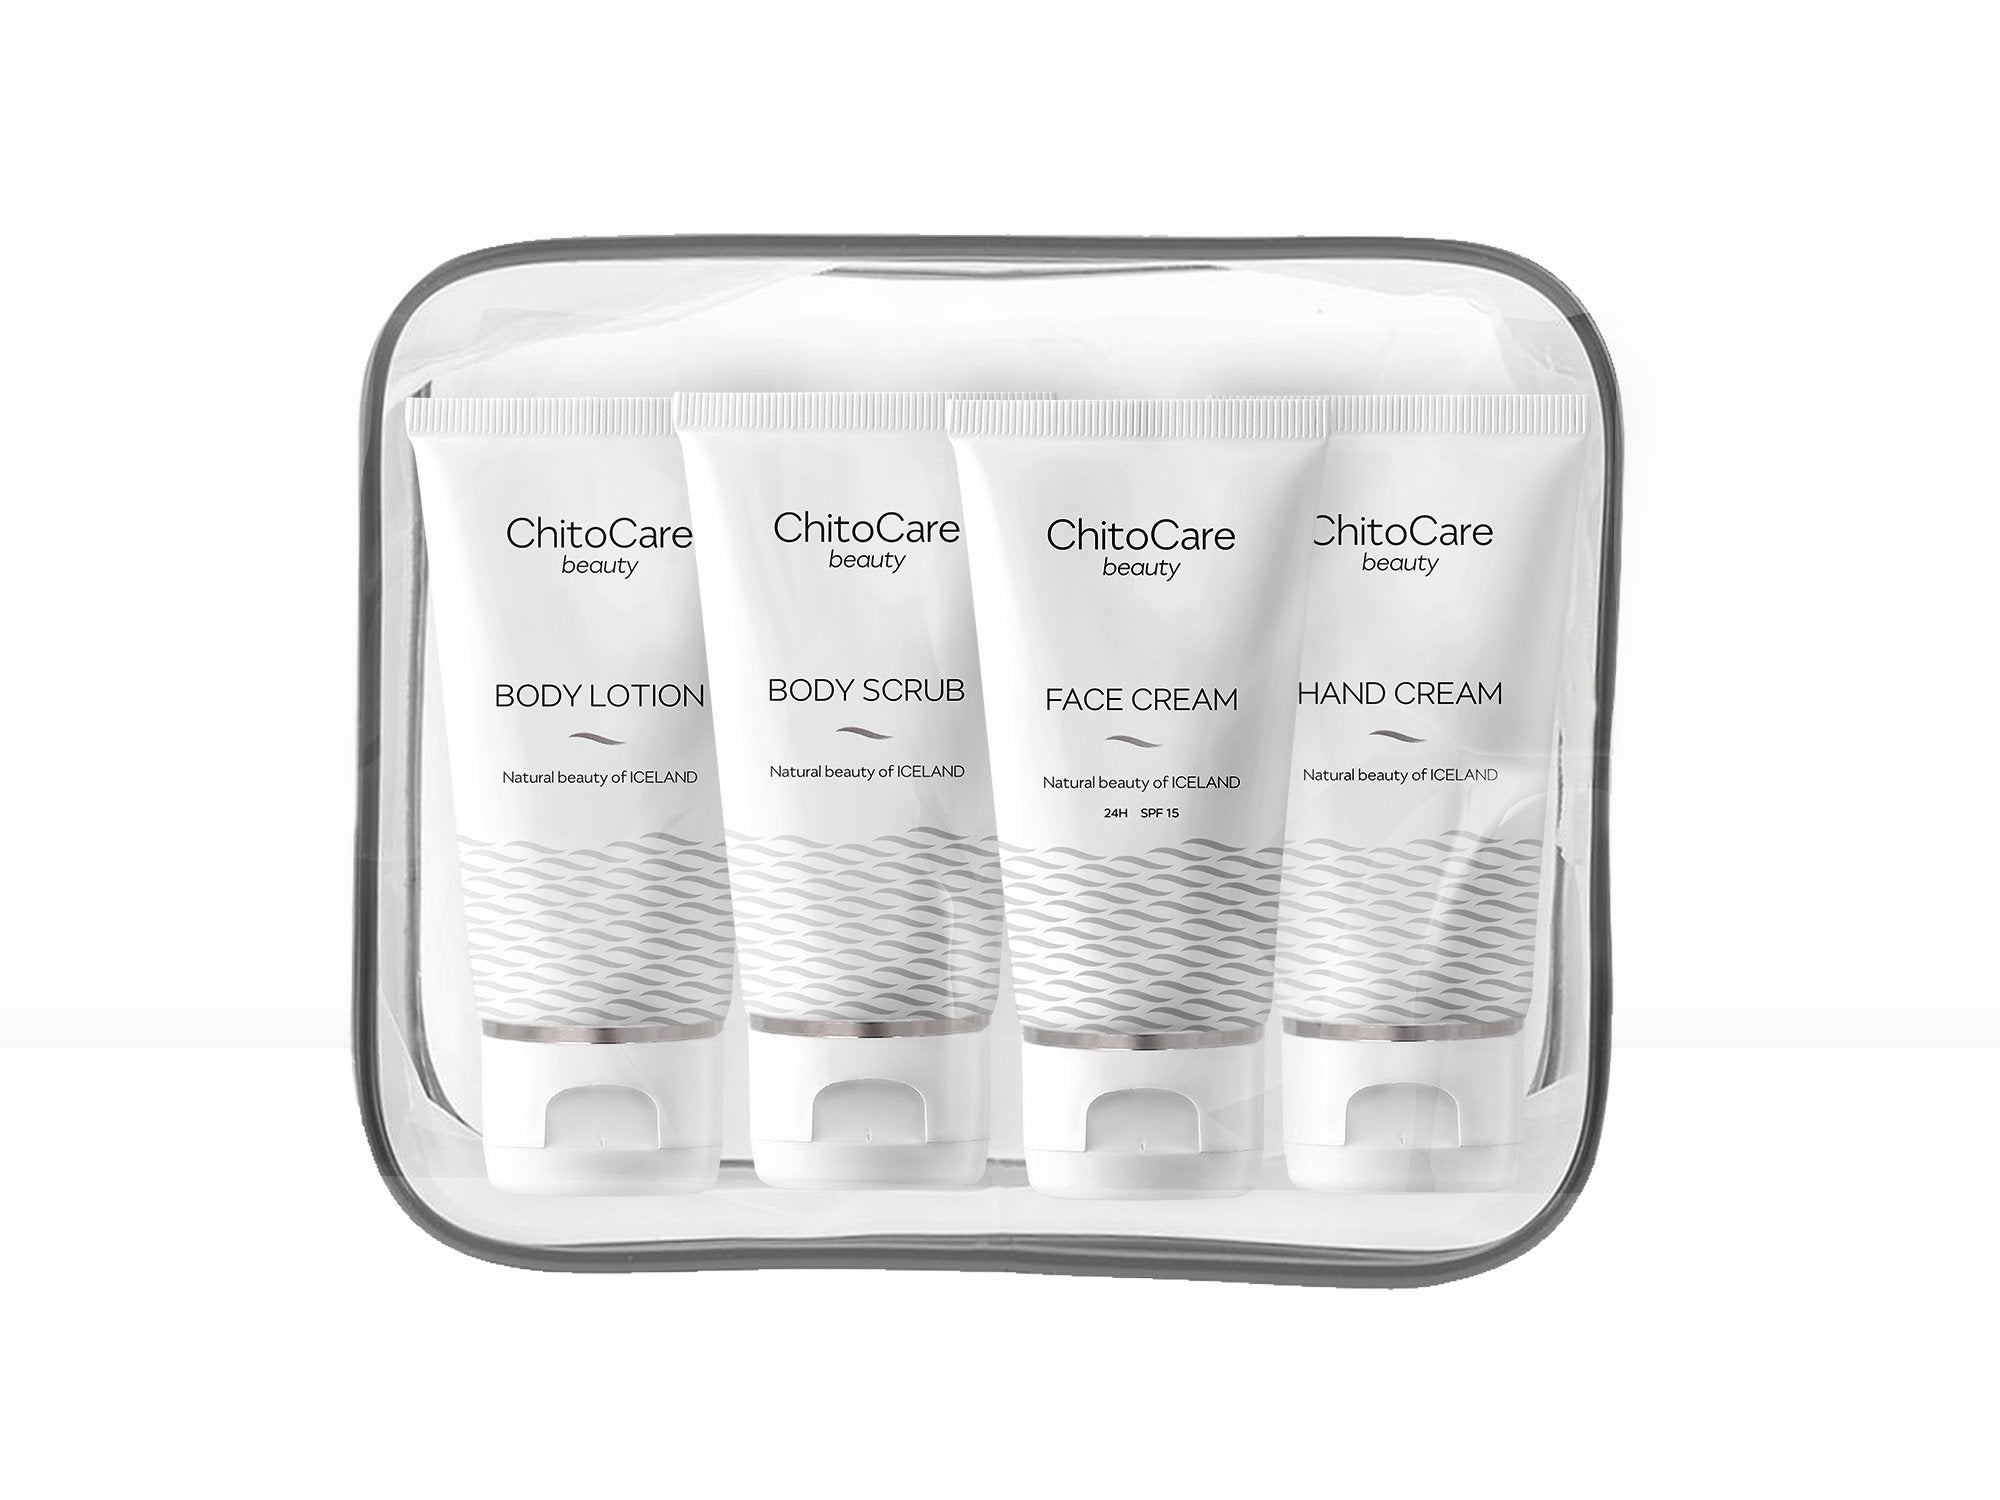 Image of ChitoCare Beauty Travel Kit, containing four 50ml tubes with body scrub, body lotion, hand cream and face cream.